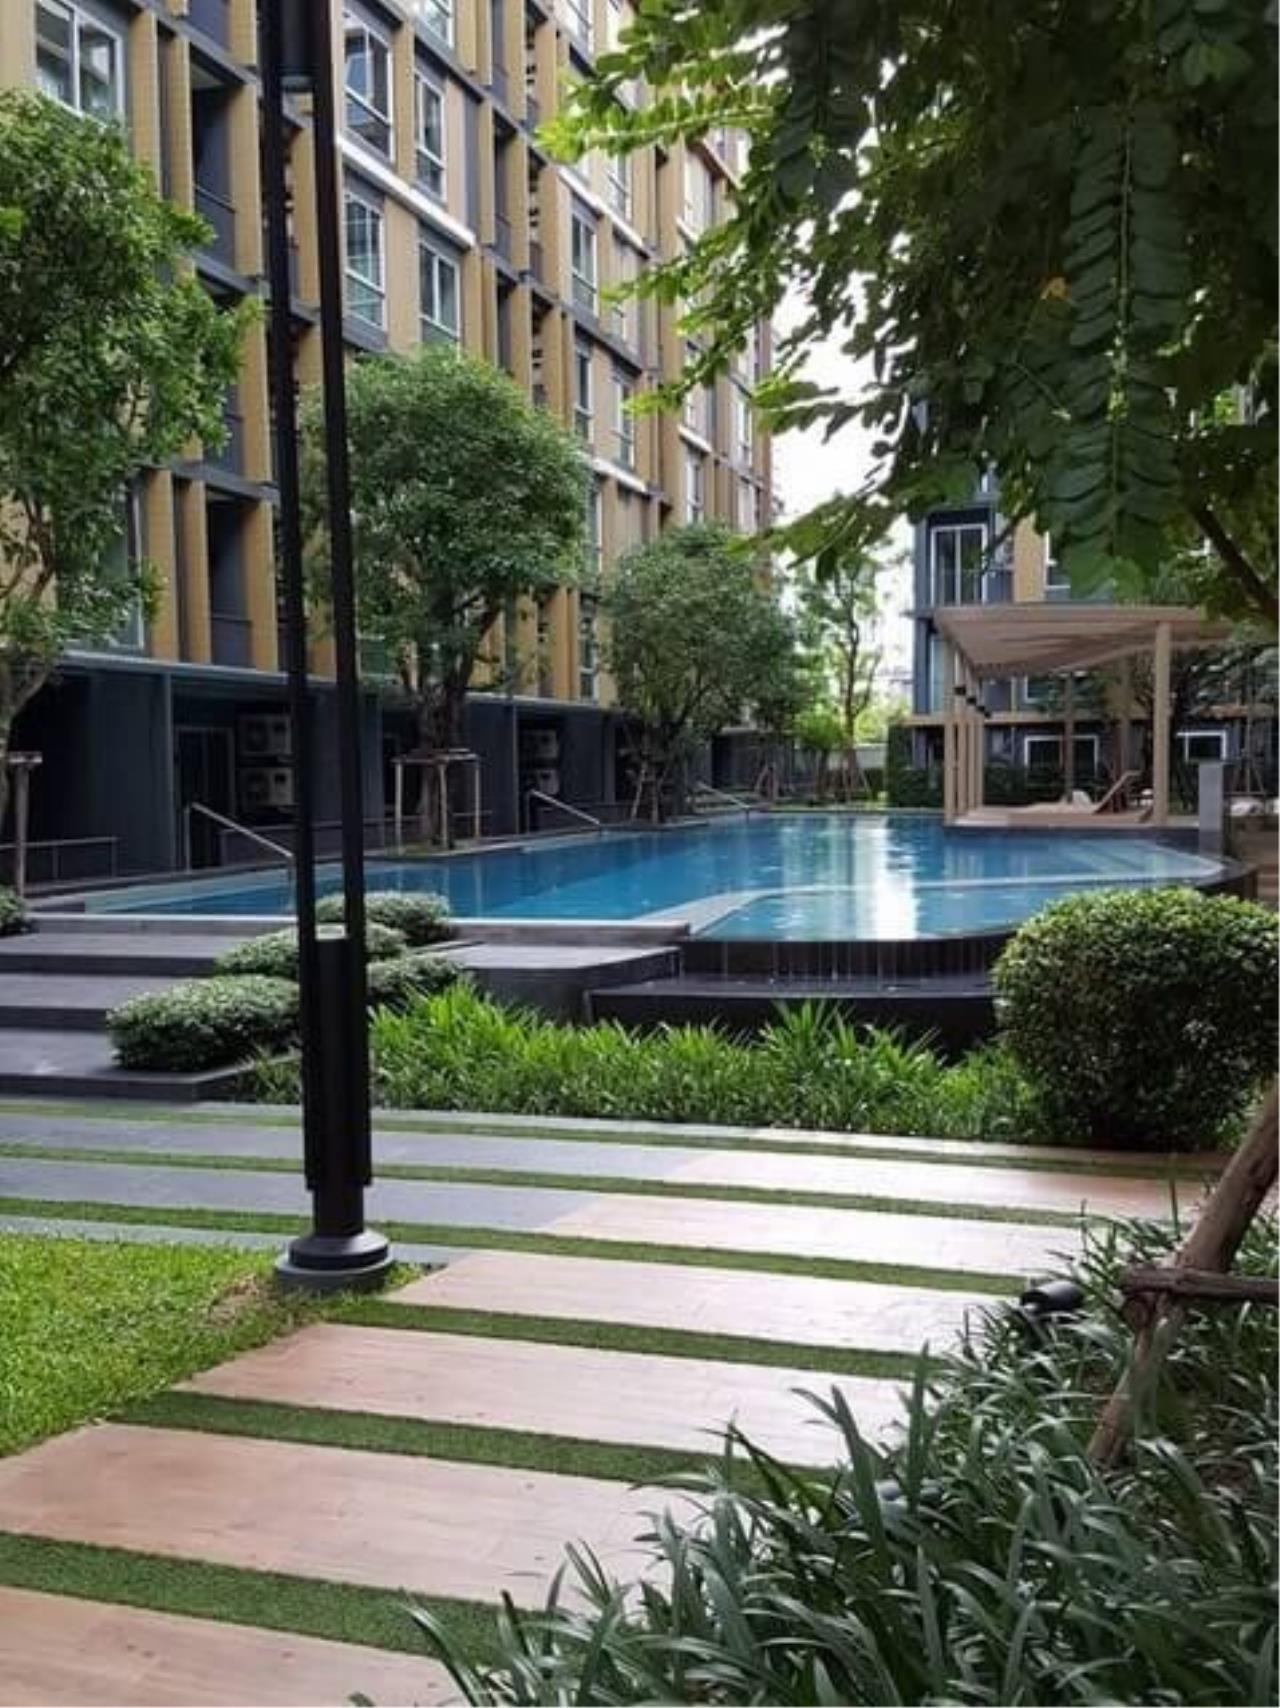 RE/MAX All Star Realty Agency's Metro Luxe Rama4 for rent 11,000 baht only. 28sqm 7